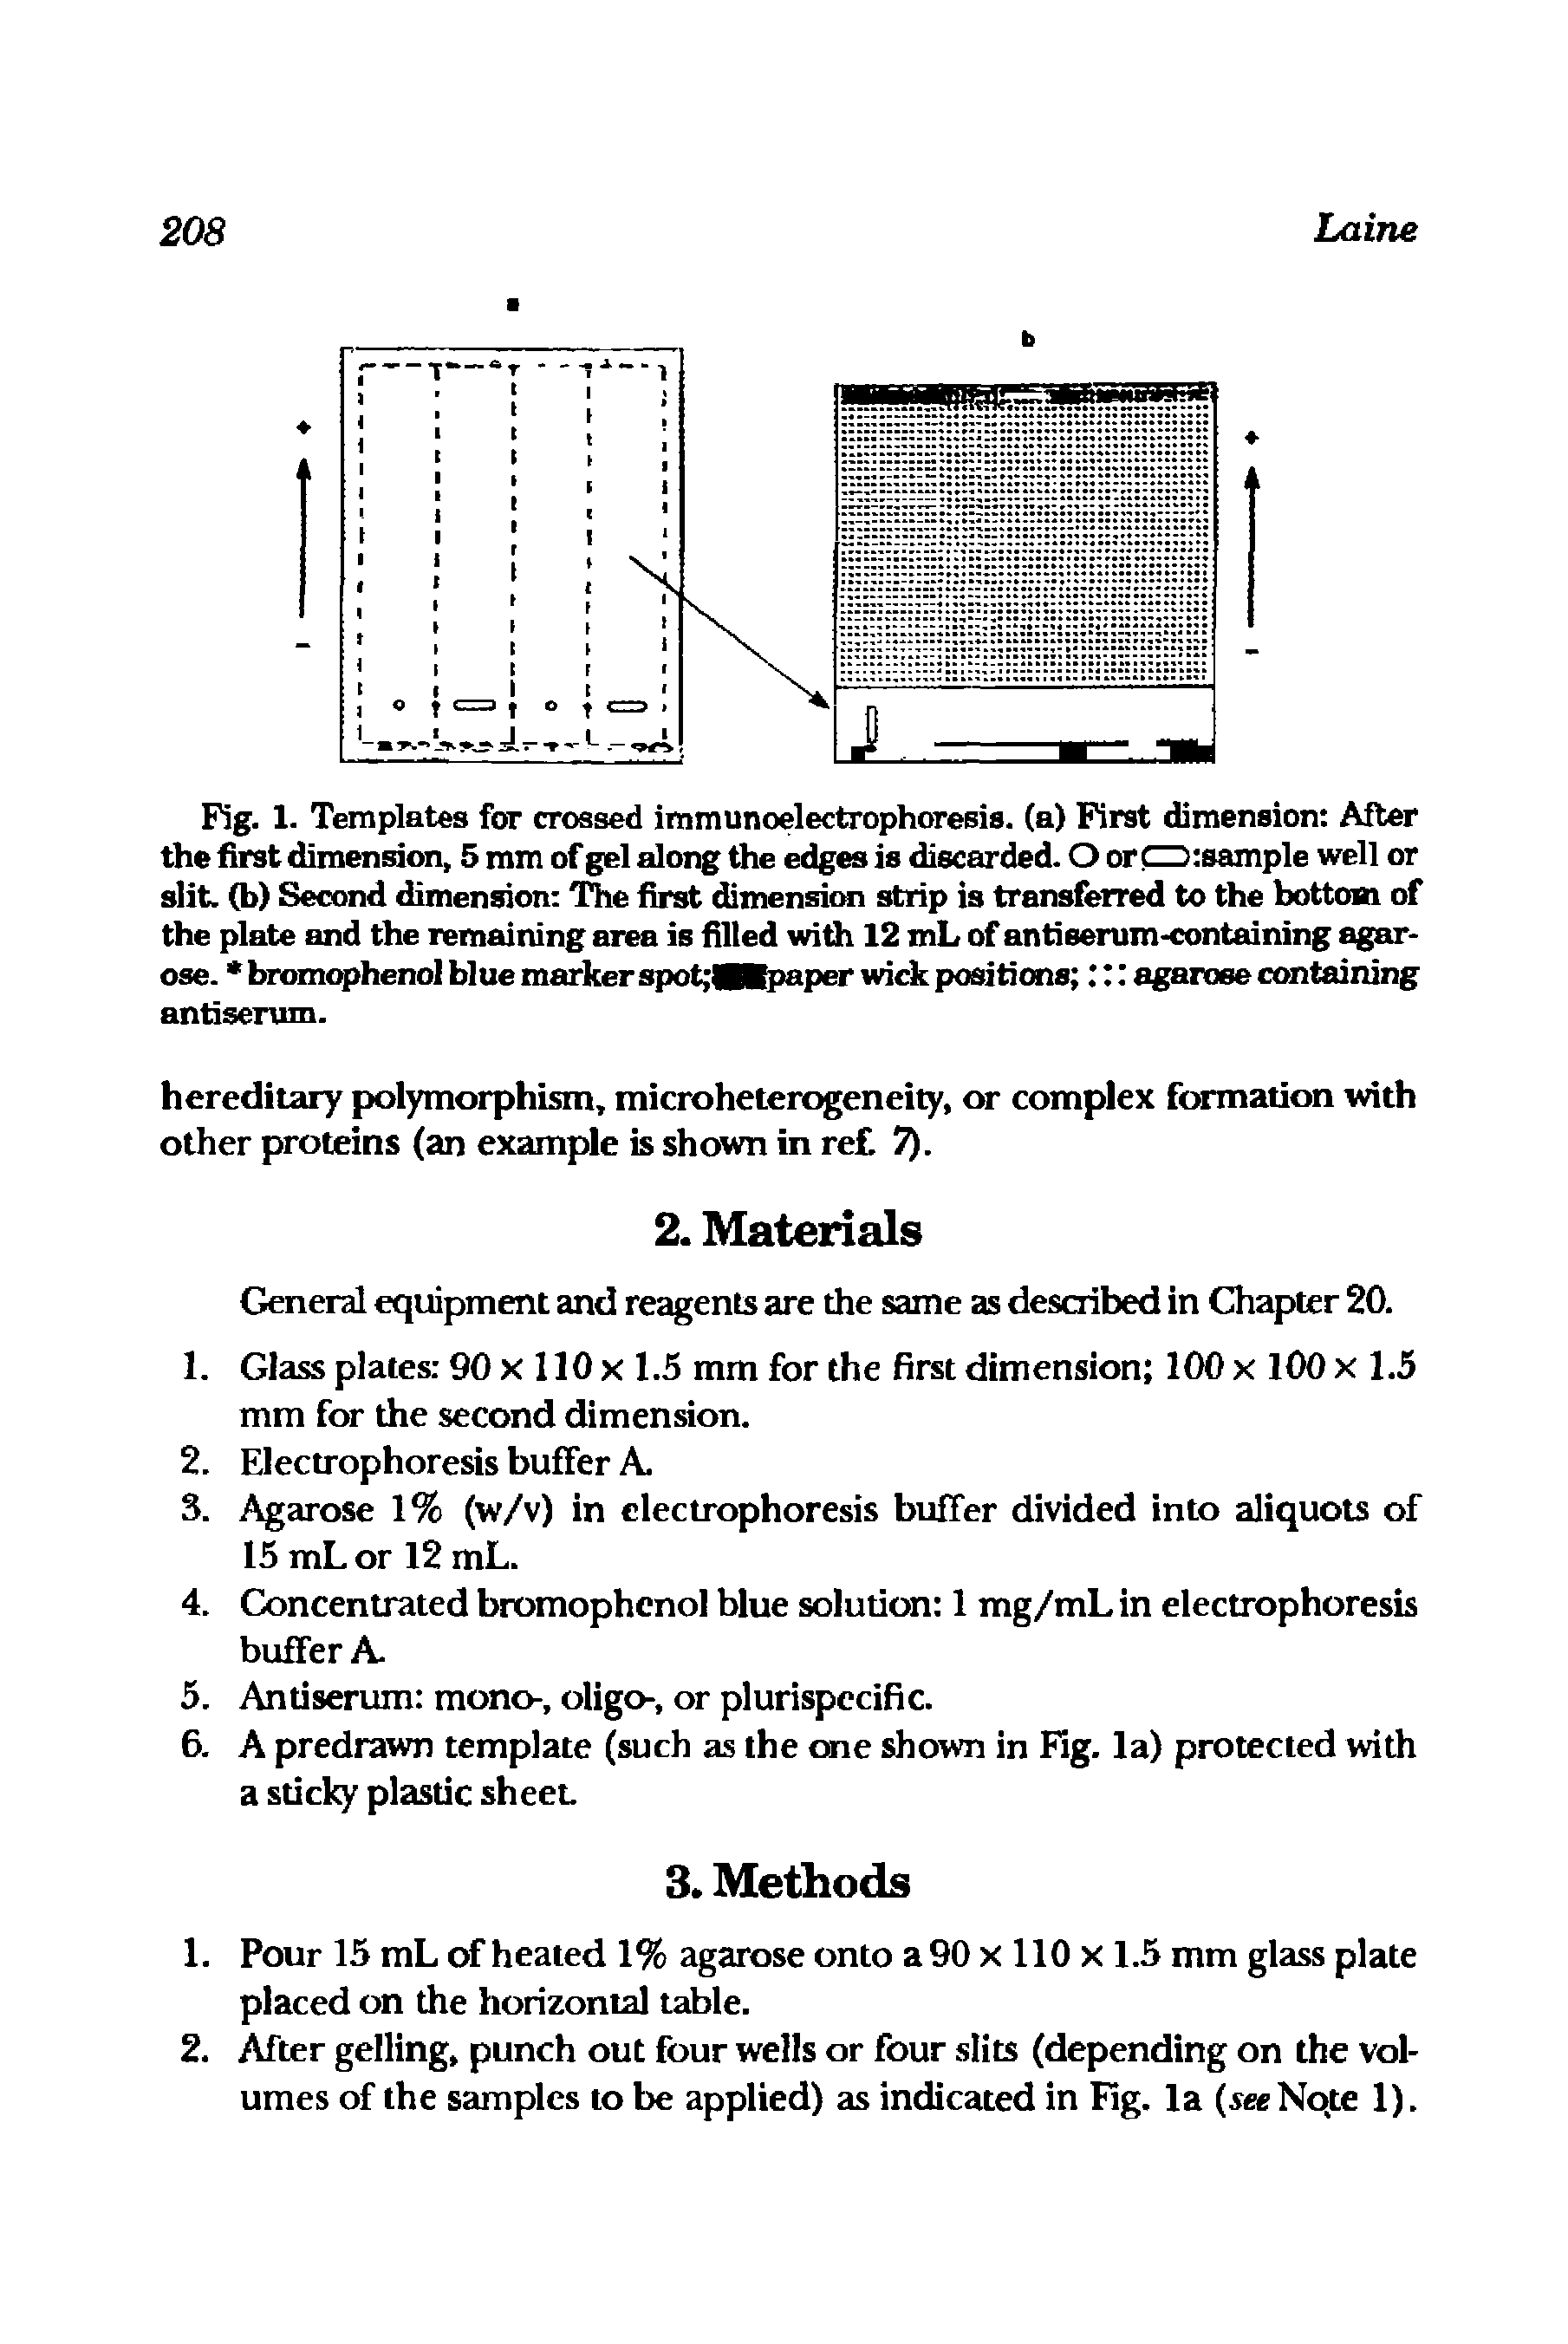 Fig. 1. Templates for crossed immunoelectrophoresis. (a) First dimension After the first dimension, 5 mm of gel along the edges is discarded. O or CD sample well or slit, (b) Second dimension The first dimensicm strip is transferred to the bottom of the plate and the remaining area is filled with 12 mL of antiserum-containing agarose. bromophenol blue marker spot MKpaper wick positions t agarose containing antiserum.